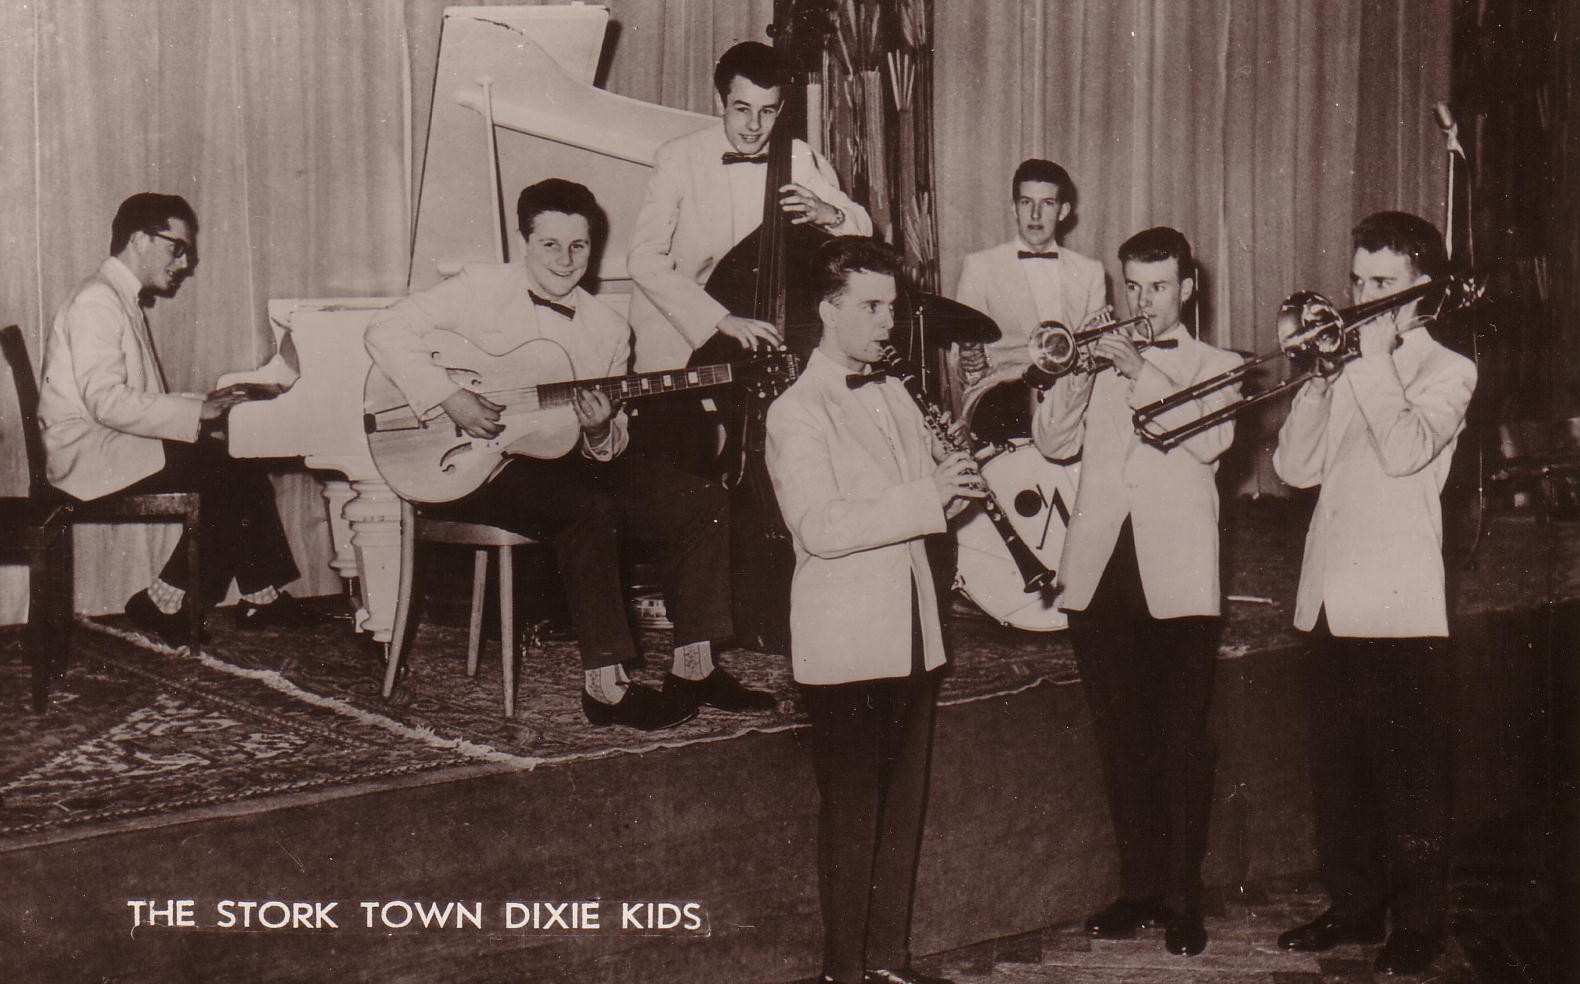 The Stork Town Dixie Kids in 1958